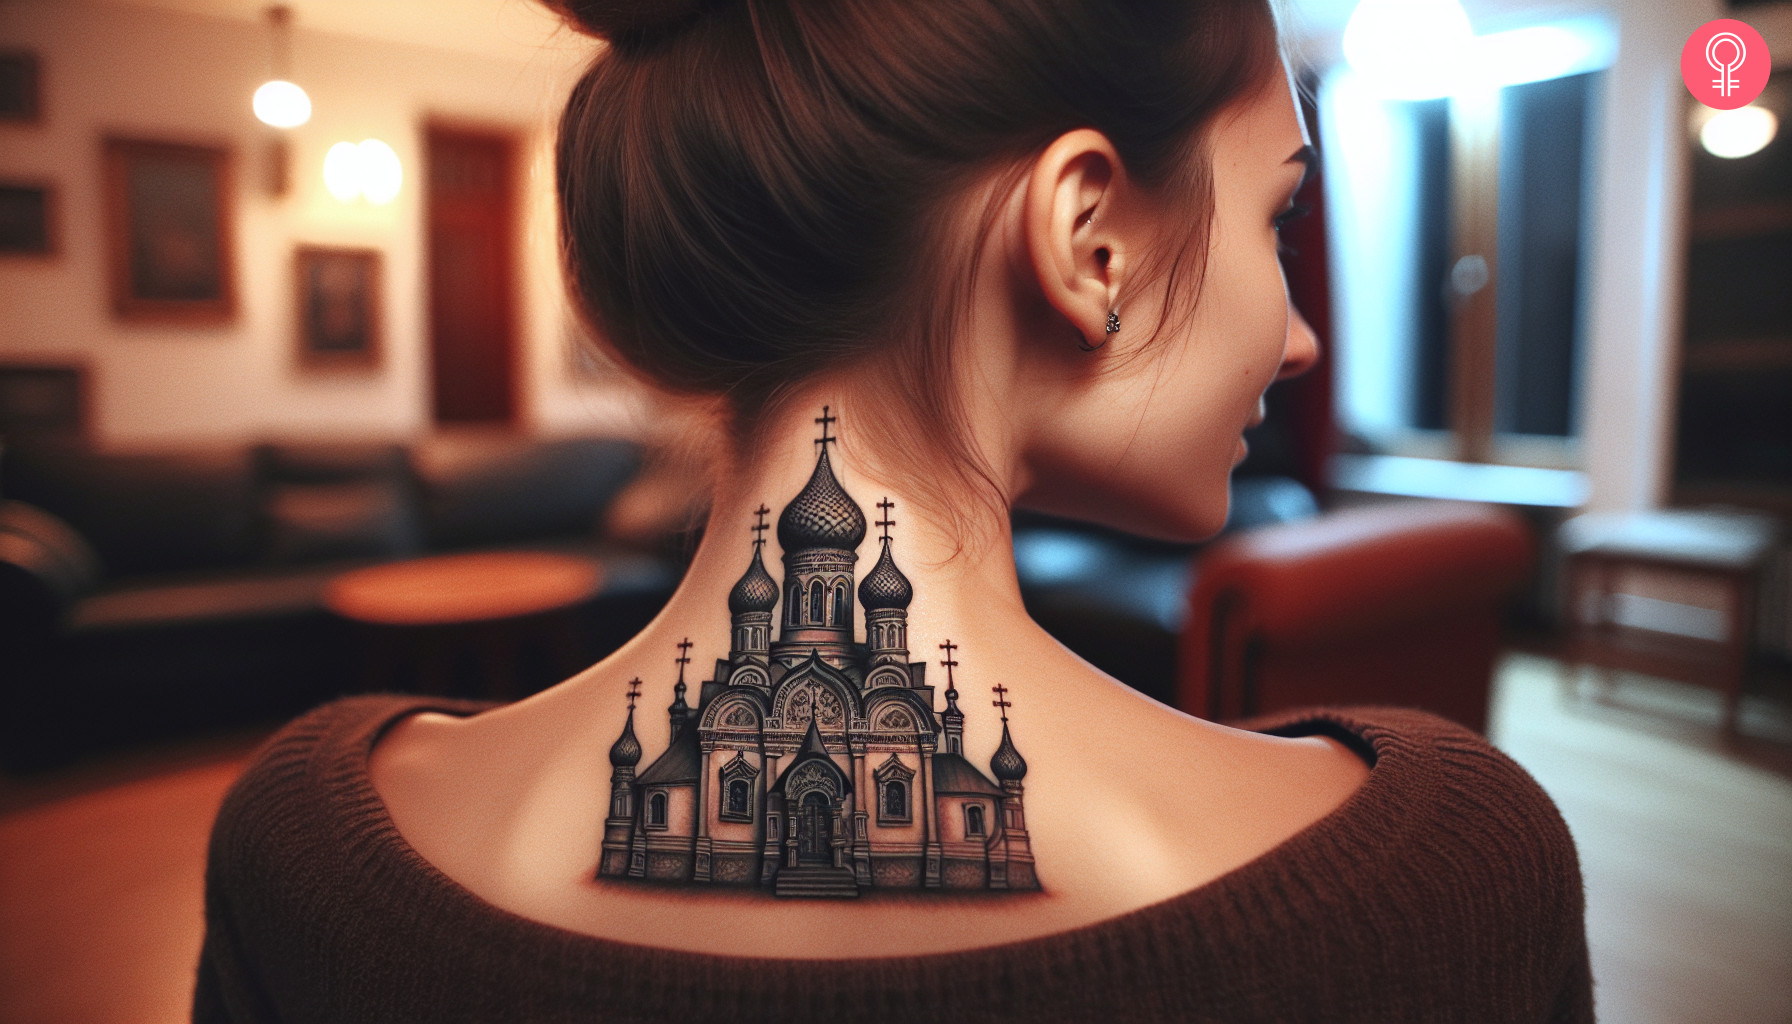 A Russian cathedral tattoo on the nape of the neck